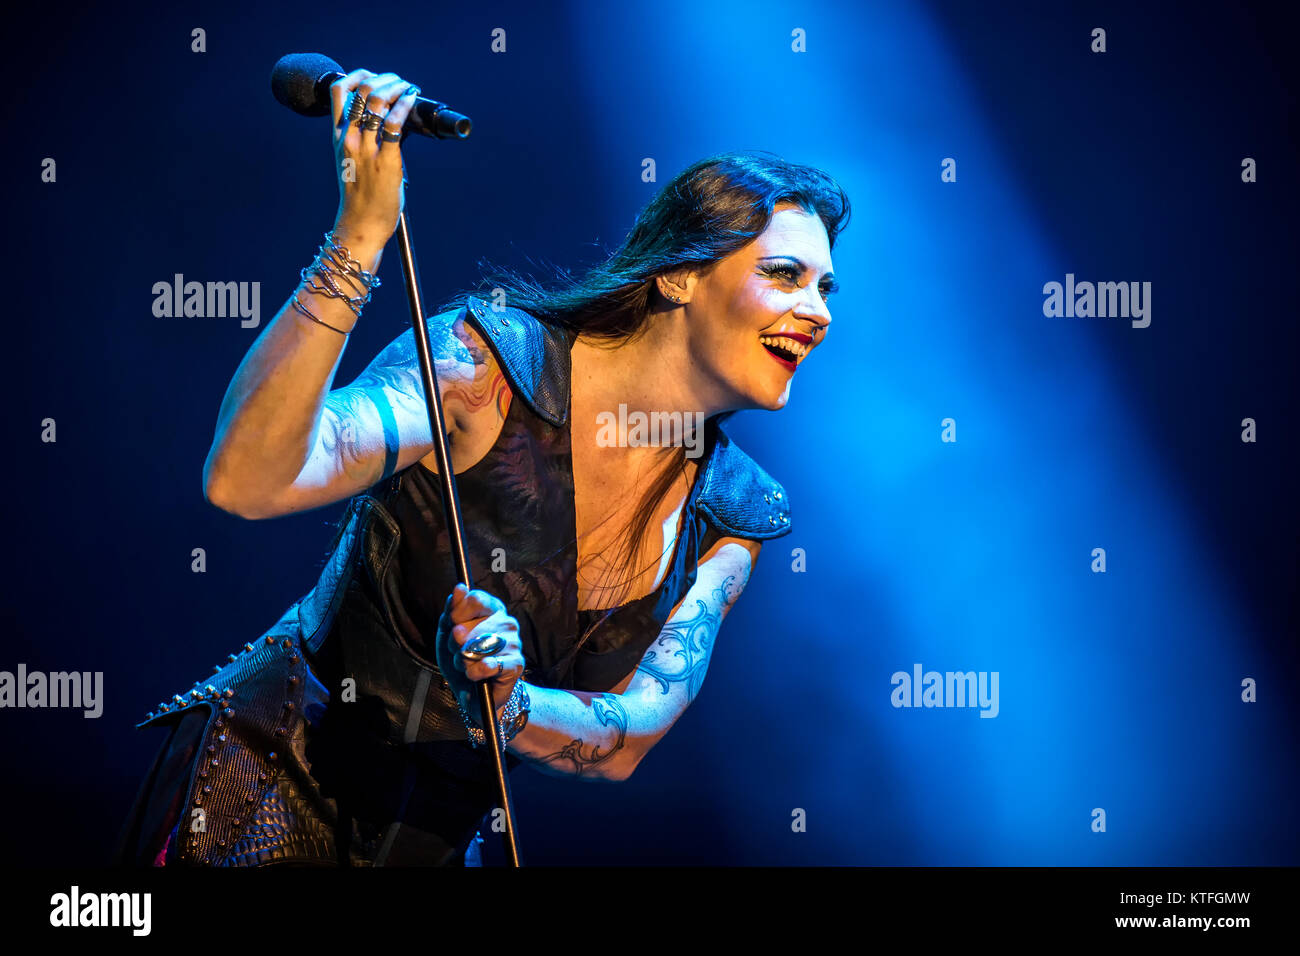 Nightwish, the Finnish symphonic metal band, performs a live concert at the Swedish music festival Bråvalla Festival 2016. Here vocalist Floor Jansen is seen live on stage. Sweden, 02/07 2016. Stock Photo